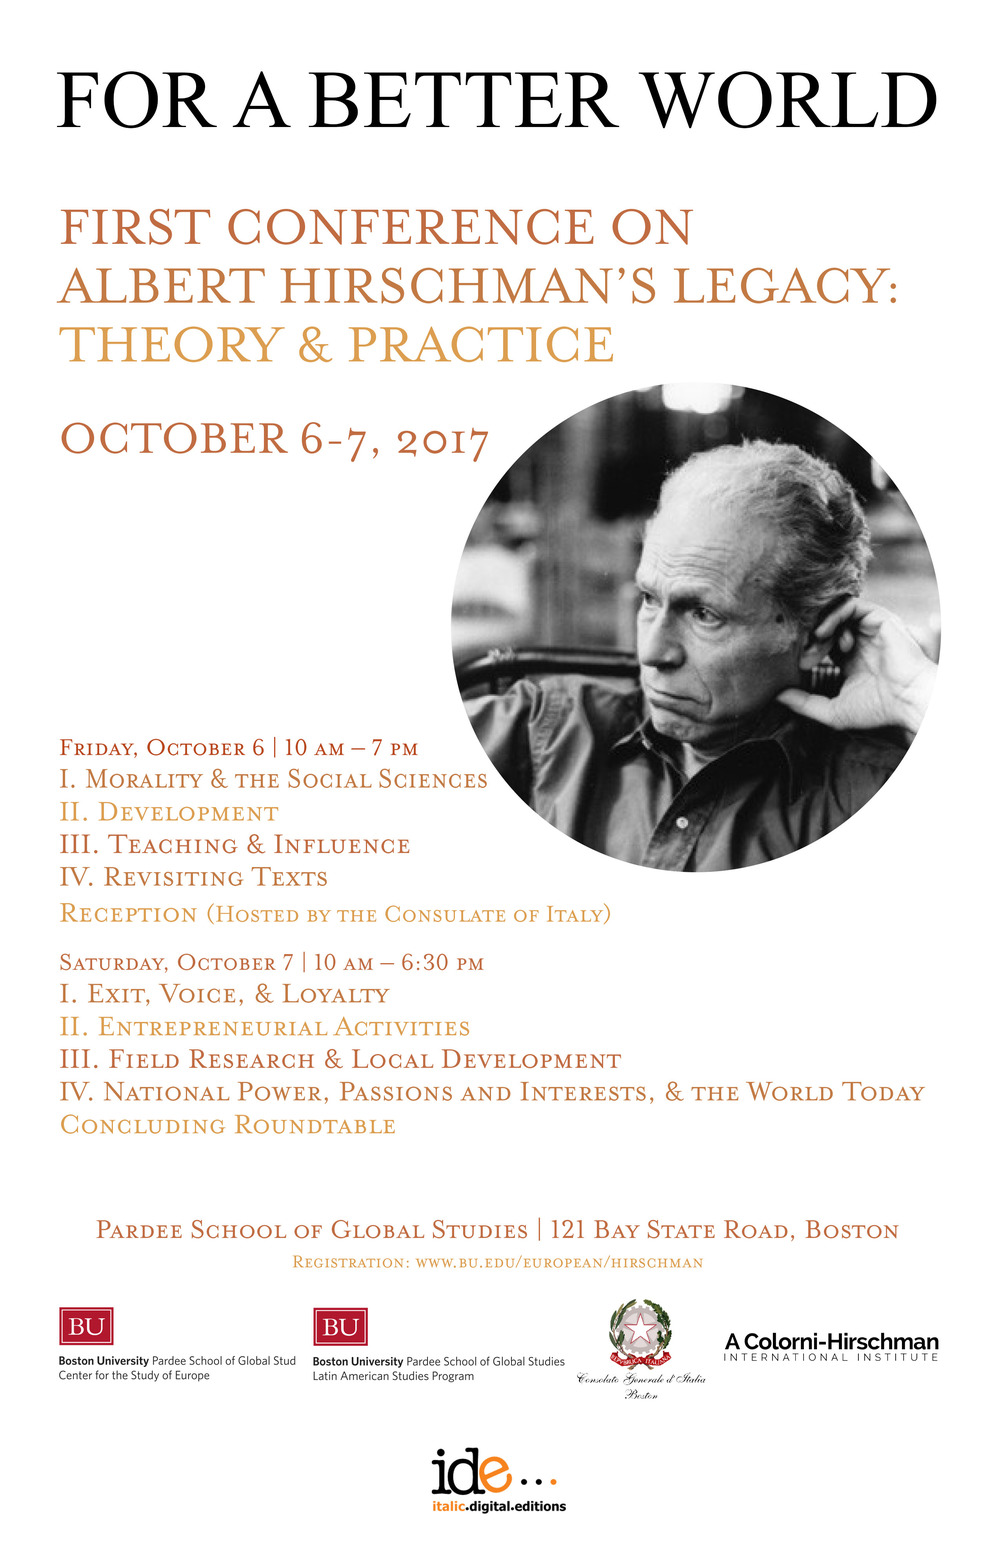 For a better world. First Conference on Albert Hirschman's legacy: theory and practice (Boston, 6-7 ottobre, 2017)